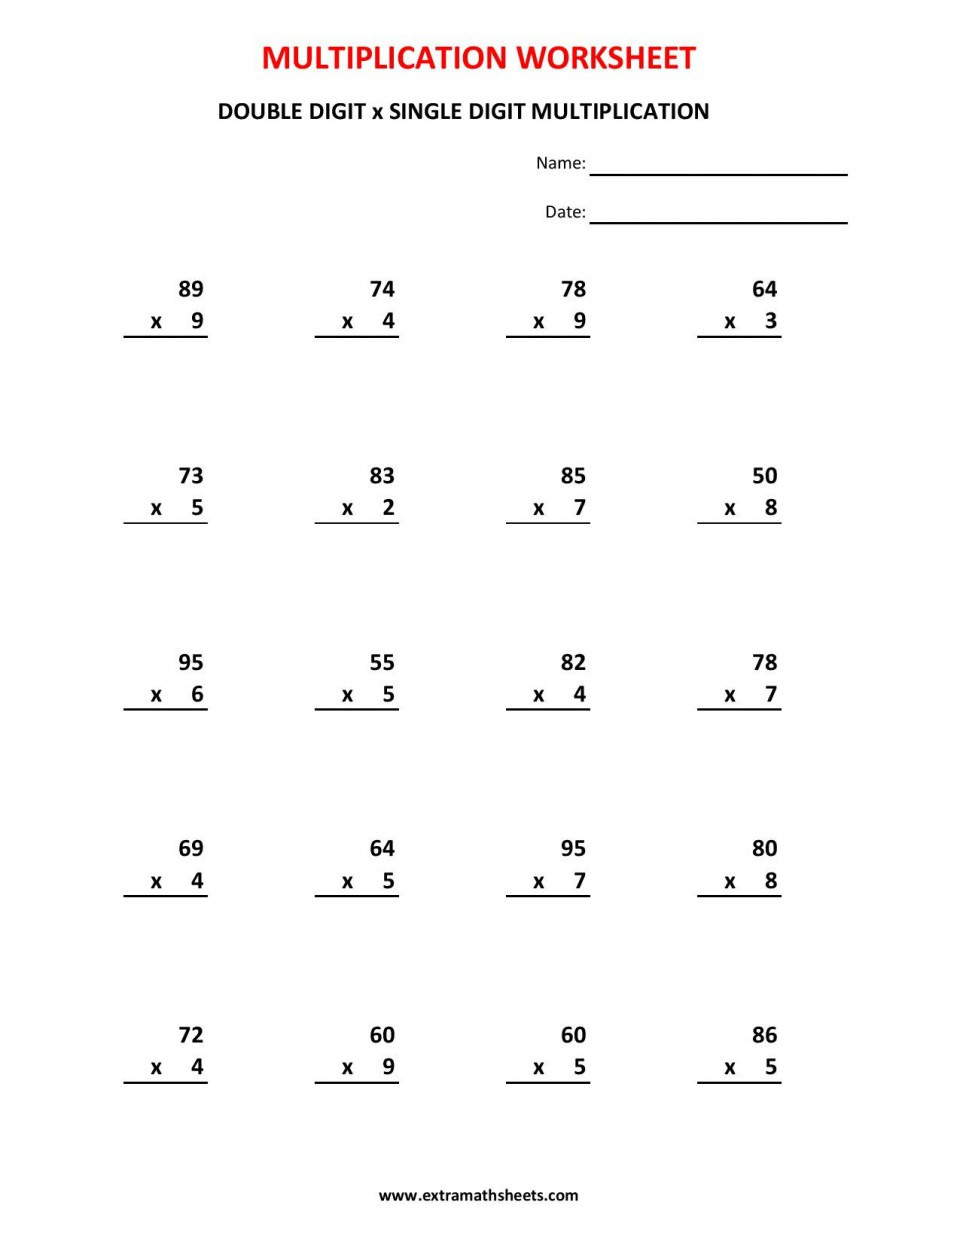 double-digit-by-double-digit-multiplication-worksheets-db-excel